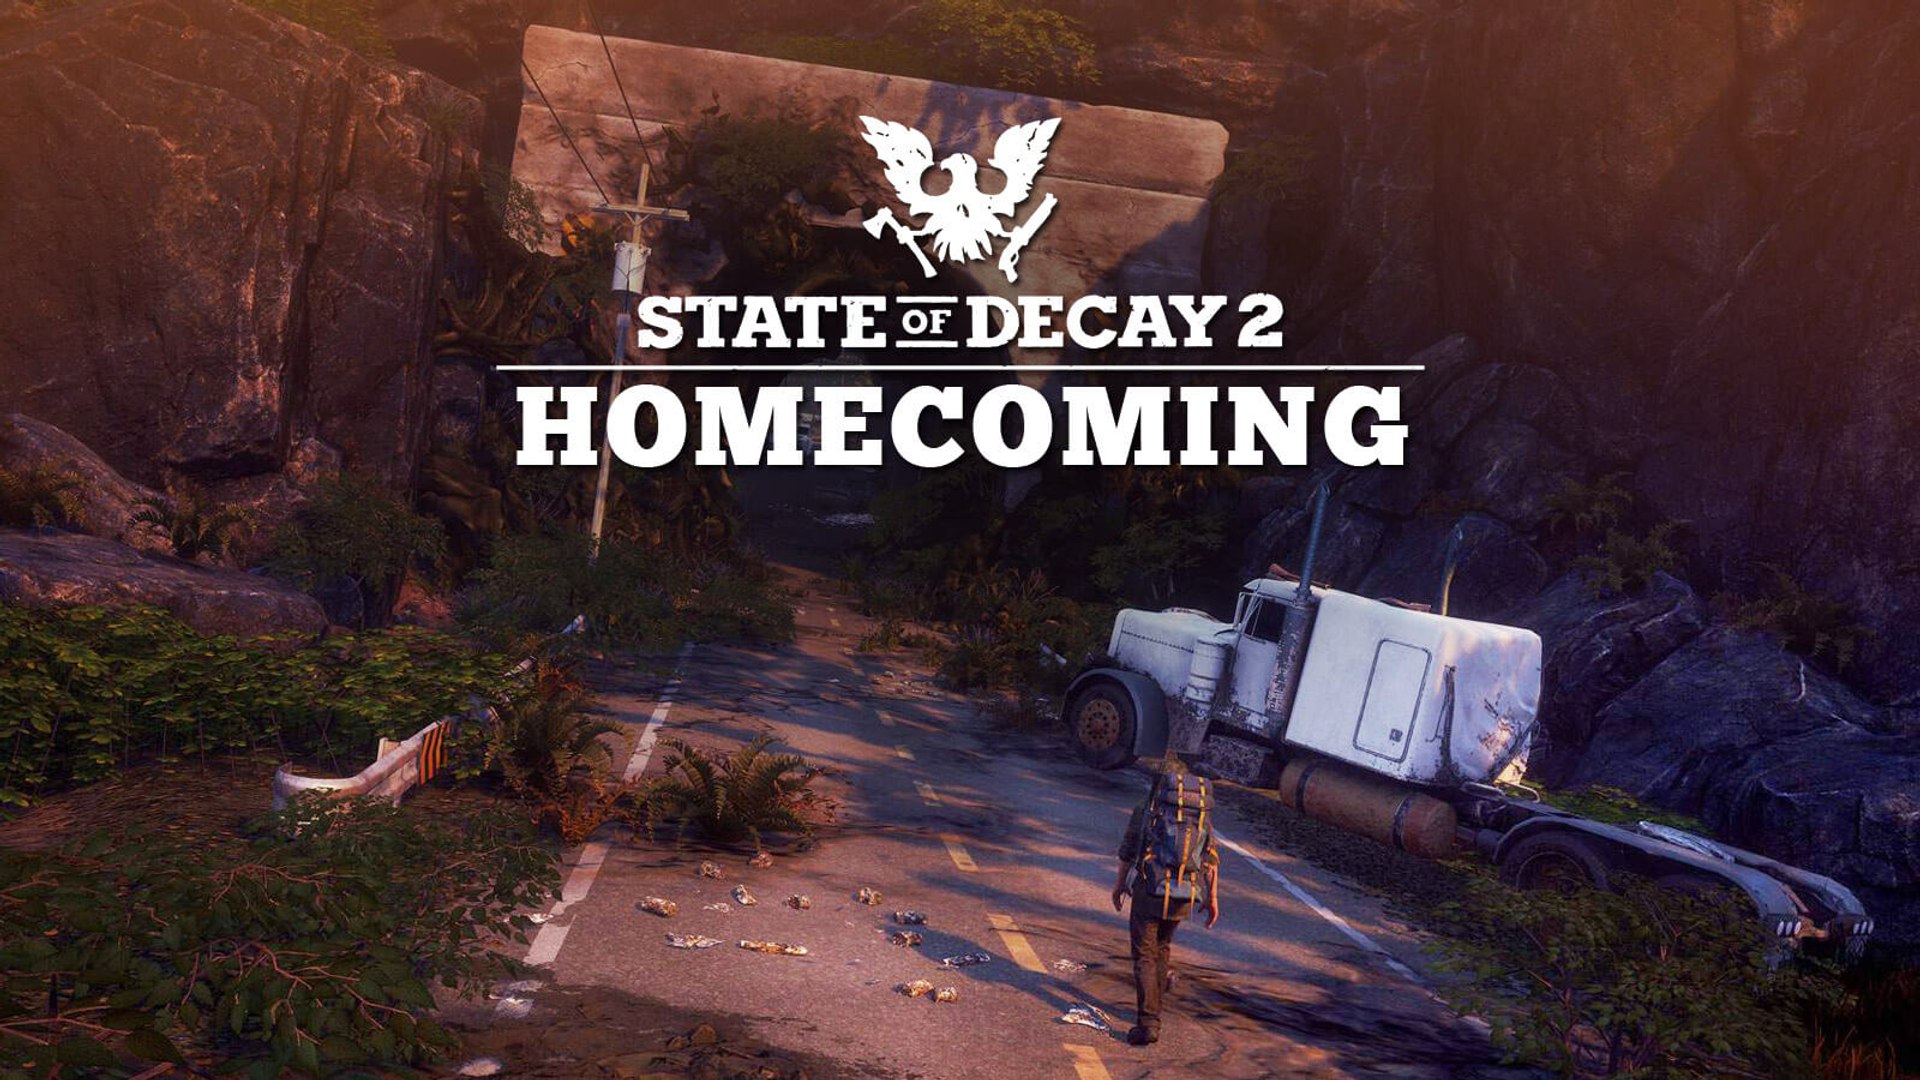 State of Decay 2 DLC Homecoming Trailer